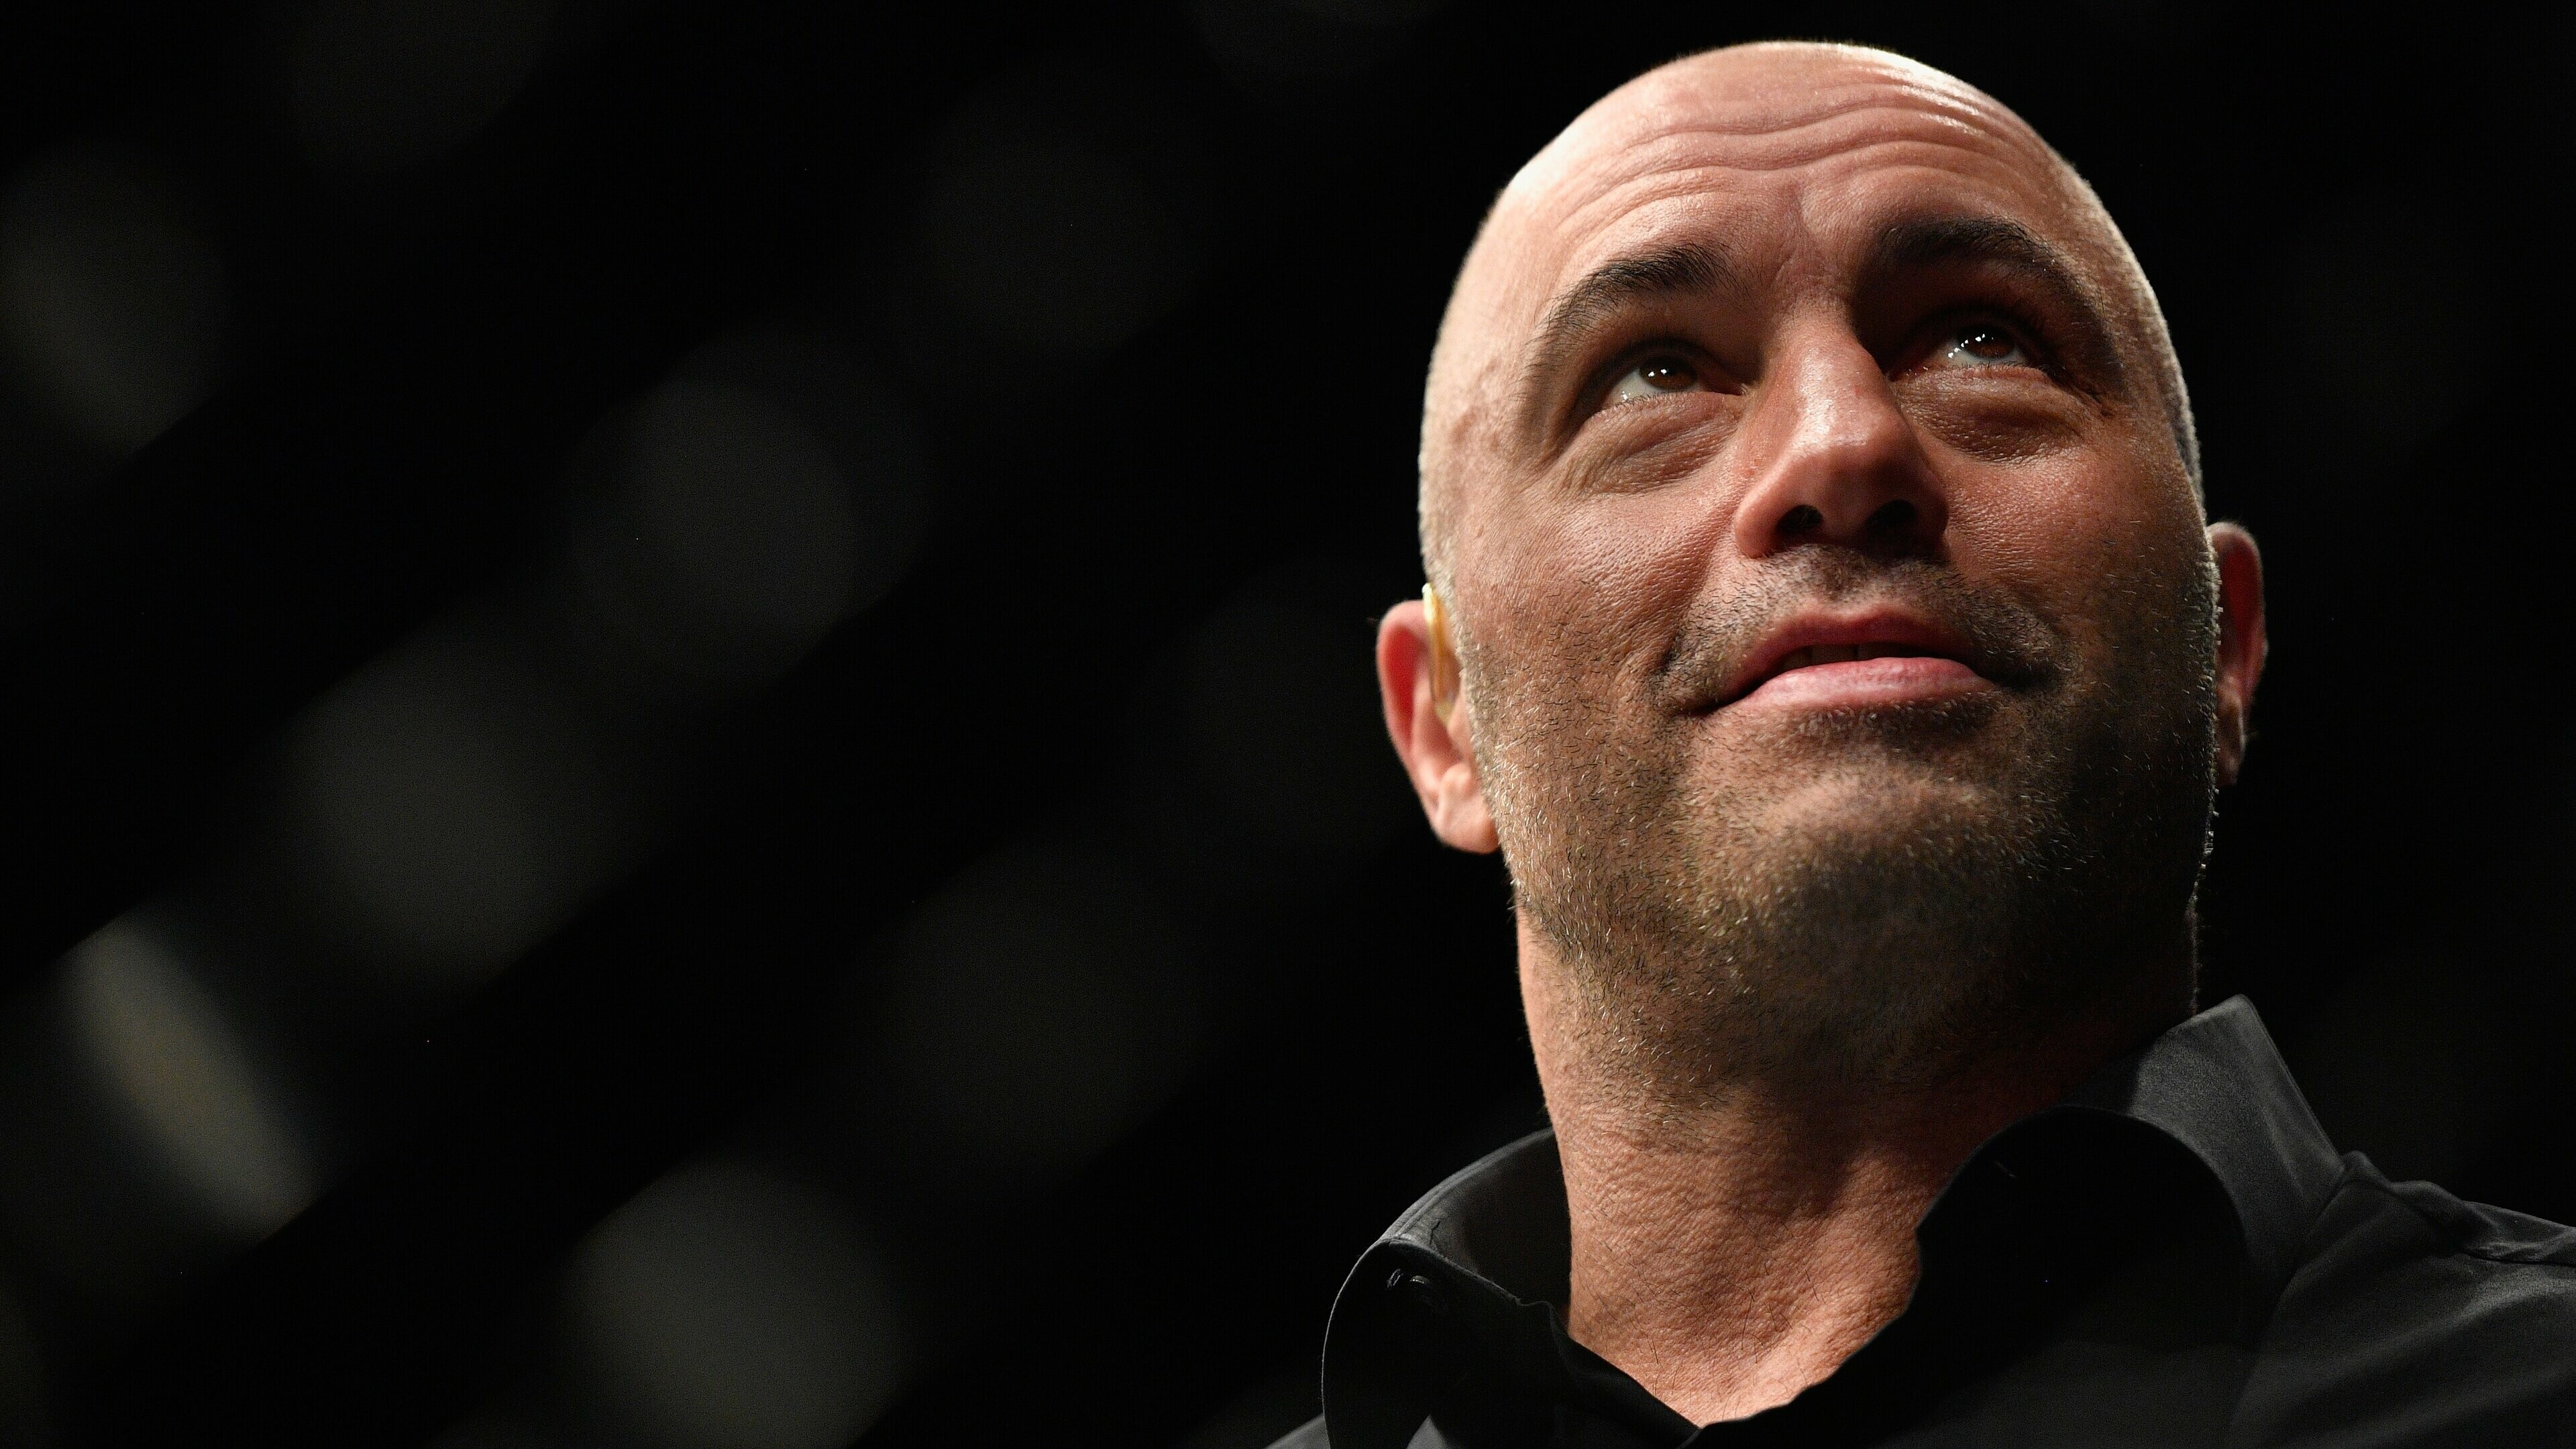 Joe Rogan: An American podcaster, comedian, actor, and former television presenter. 3840x2160 4K Background.